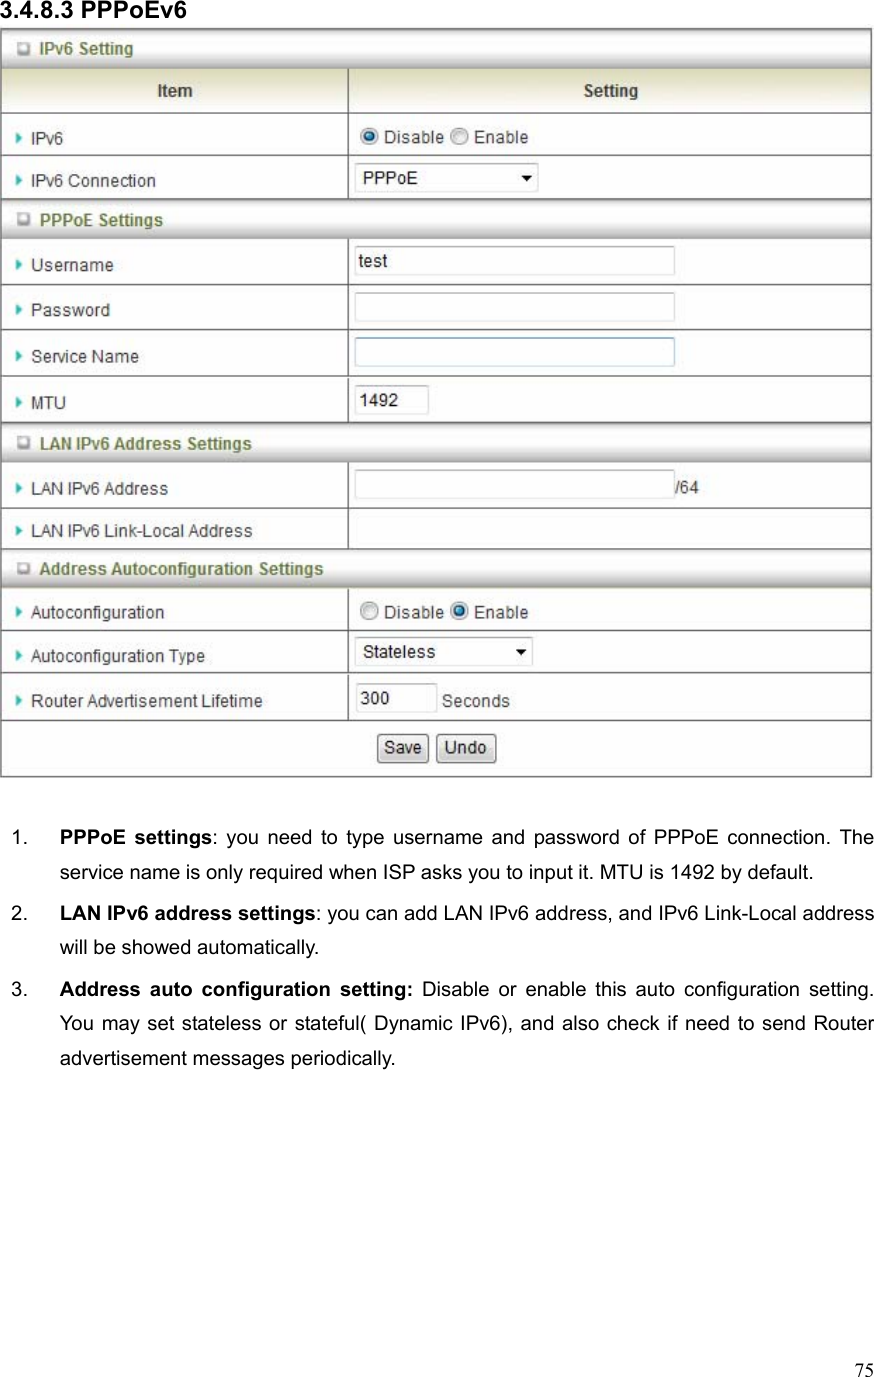  753.4.8.3 PPPoEv6   1.  PPPoE settings: you need to type username and password of PPPoE connection. The service name is only required when ISP asks you to input it. MTU is 1492 by default.   2.  LAN IPv6 address settings: you can add LAN IPv6 address, and IPv6 Link-Local address will be showed automatically. 3.  Address auto configuration setting: Disable or enable this auto configuration setting. You may set stateless or stateful( Dynamic IPv6), and also check if need to send Router advertisement messages periodically.       